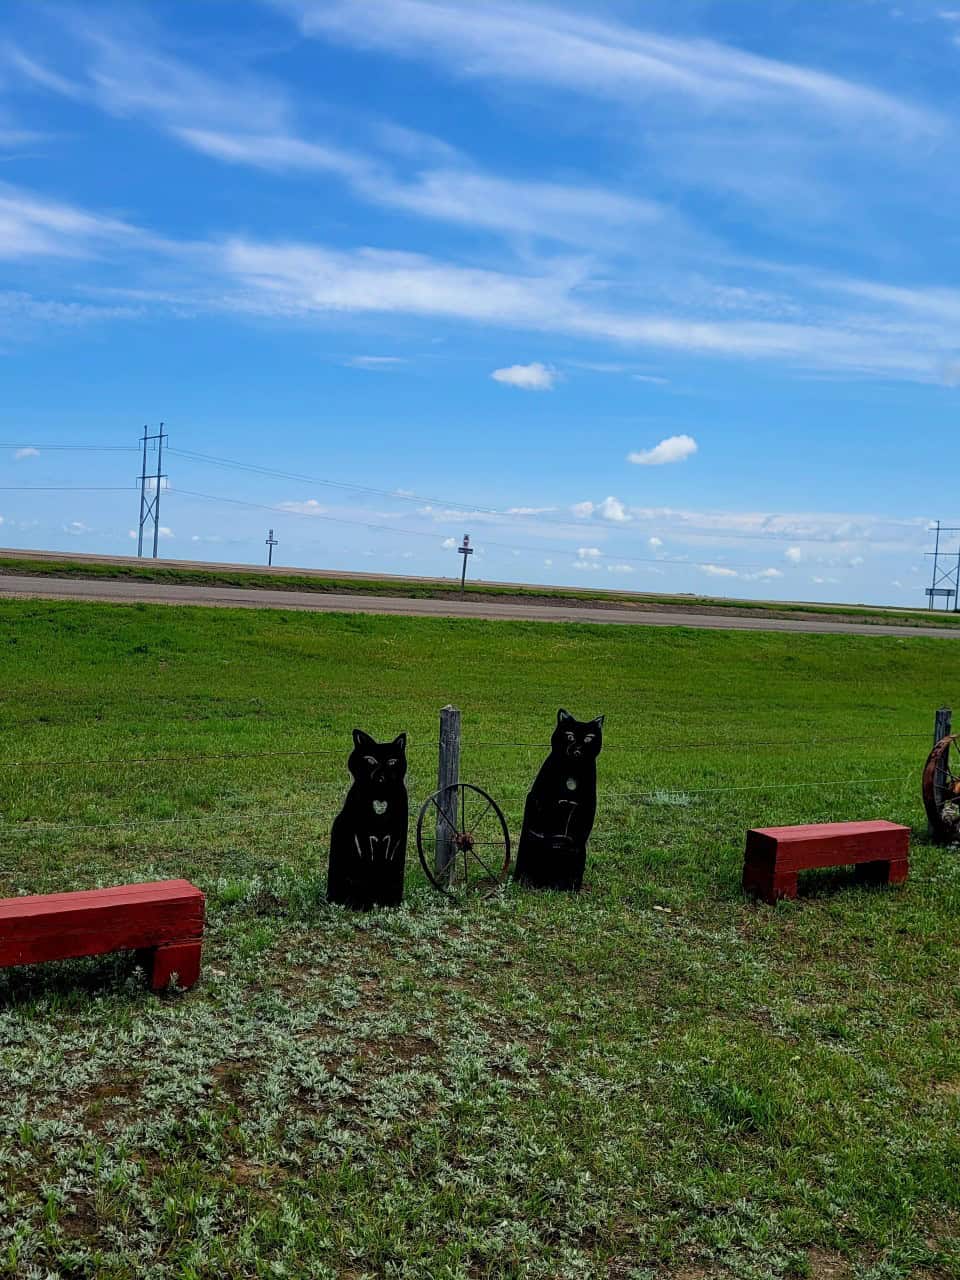 Metalwork Cats - Mortlach Saskatchewan - The Trans Canada Highway #1 can be seen behind these metalwork black cats in Mortlach, Saskatchewan, Canada.